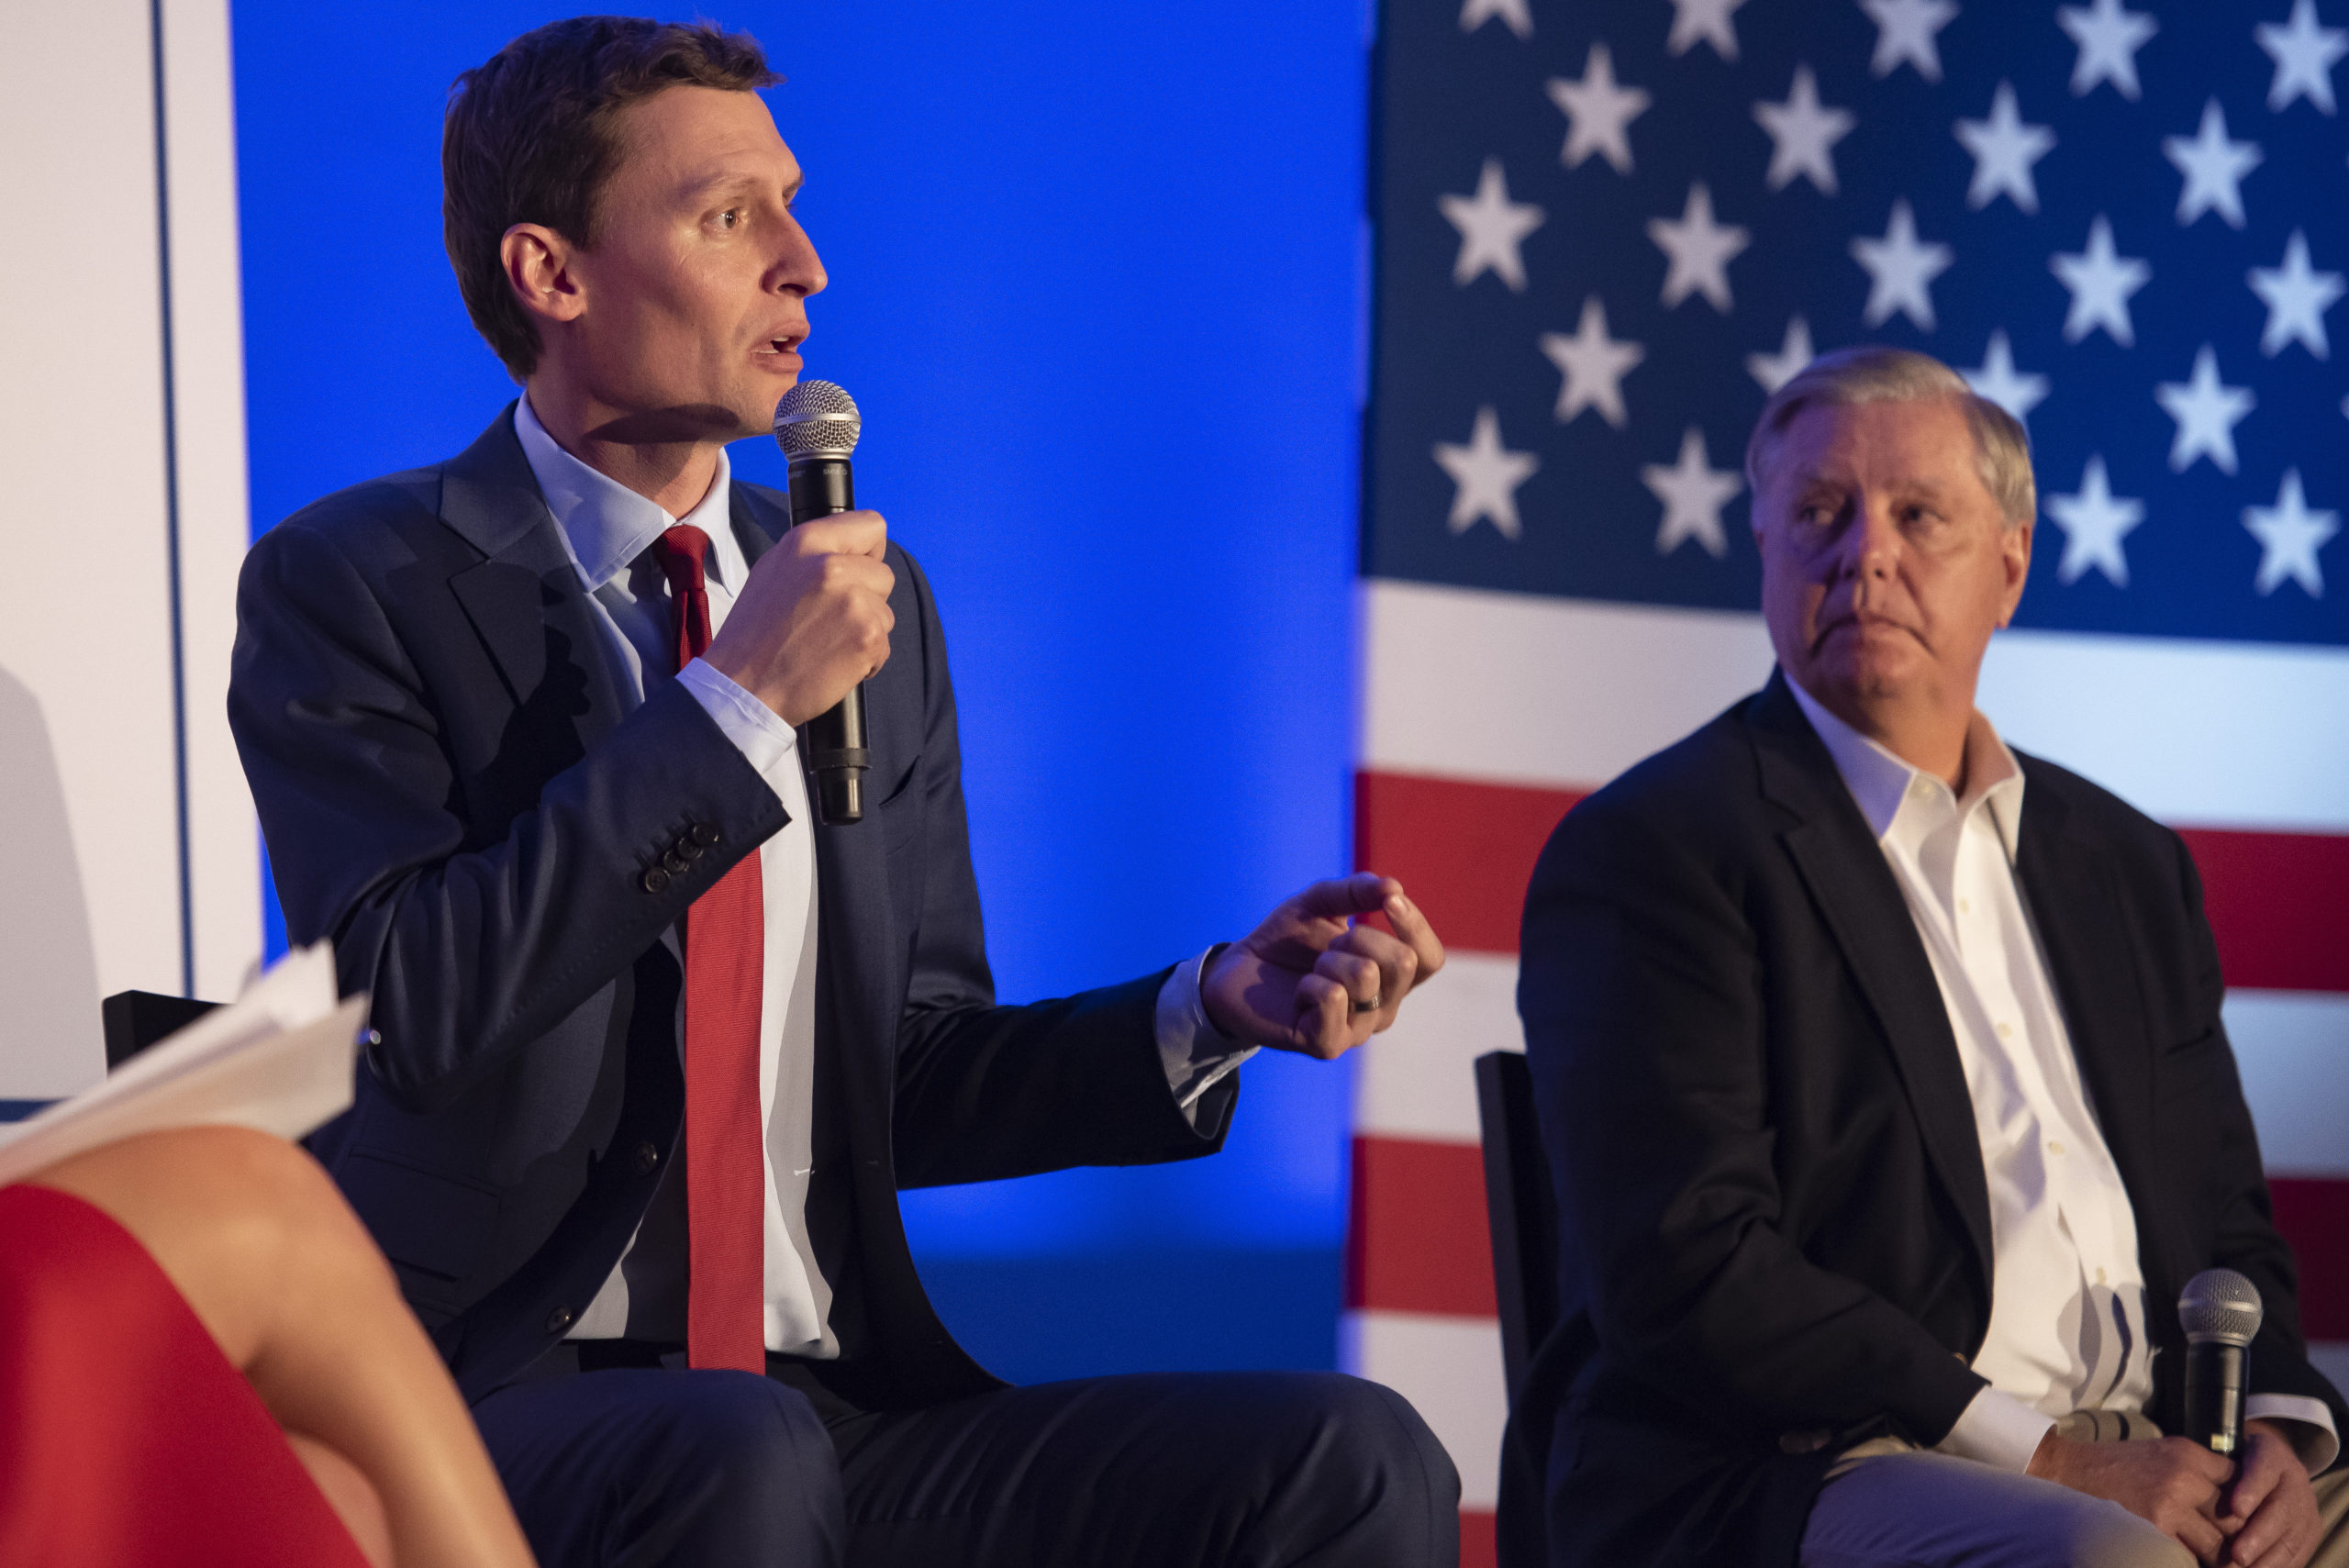 SCOTTSDALE, AZ - OCTOBER 14: Republican candidate for U.S. Senate Blake Masters speaks as Sen. Lindsey Graham (R-SC) listens during the America the Great tour panel discussion hosted by Heritage Action for America at the Scottsdale Resort at McCormick Ranch on October 14, 2022 in Scottsdale, Arizona. (Photo by Rebecca Noble/Getty Images)